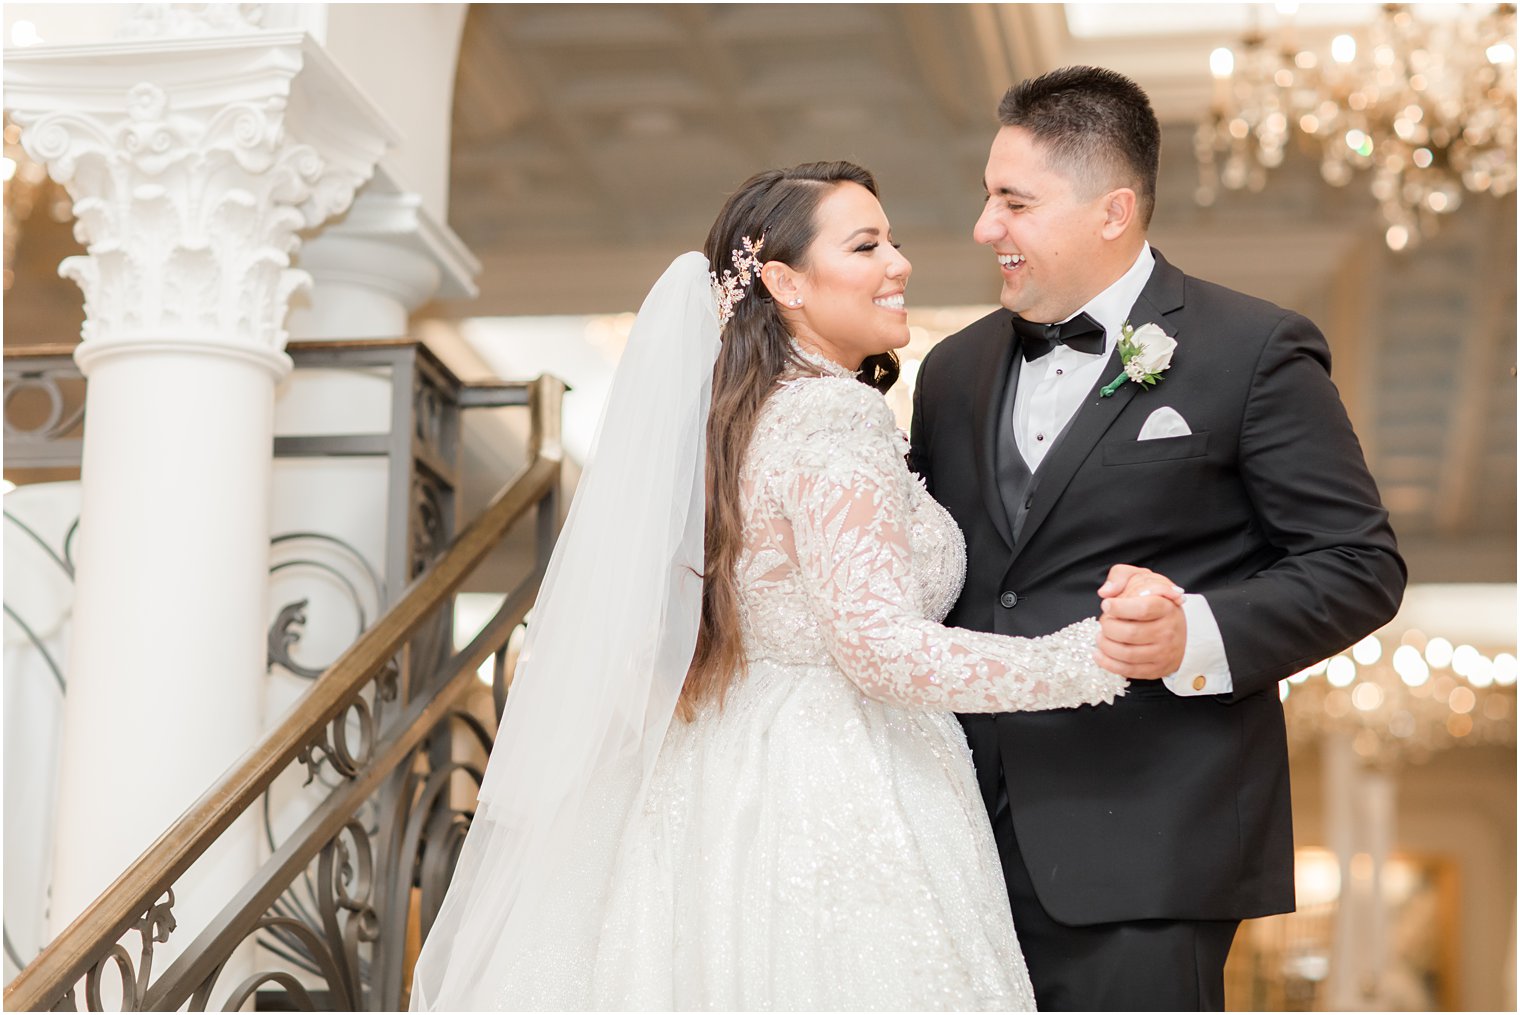 New Jersey couple smiles on wedding day